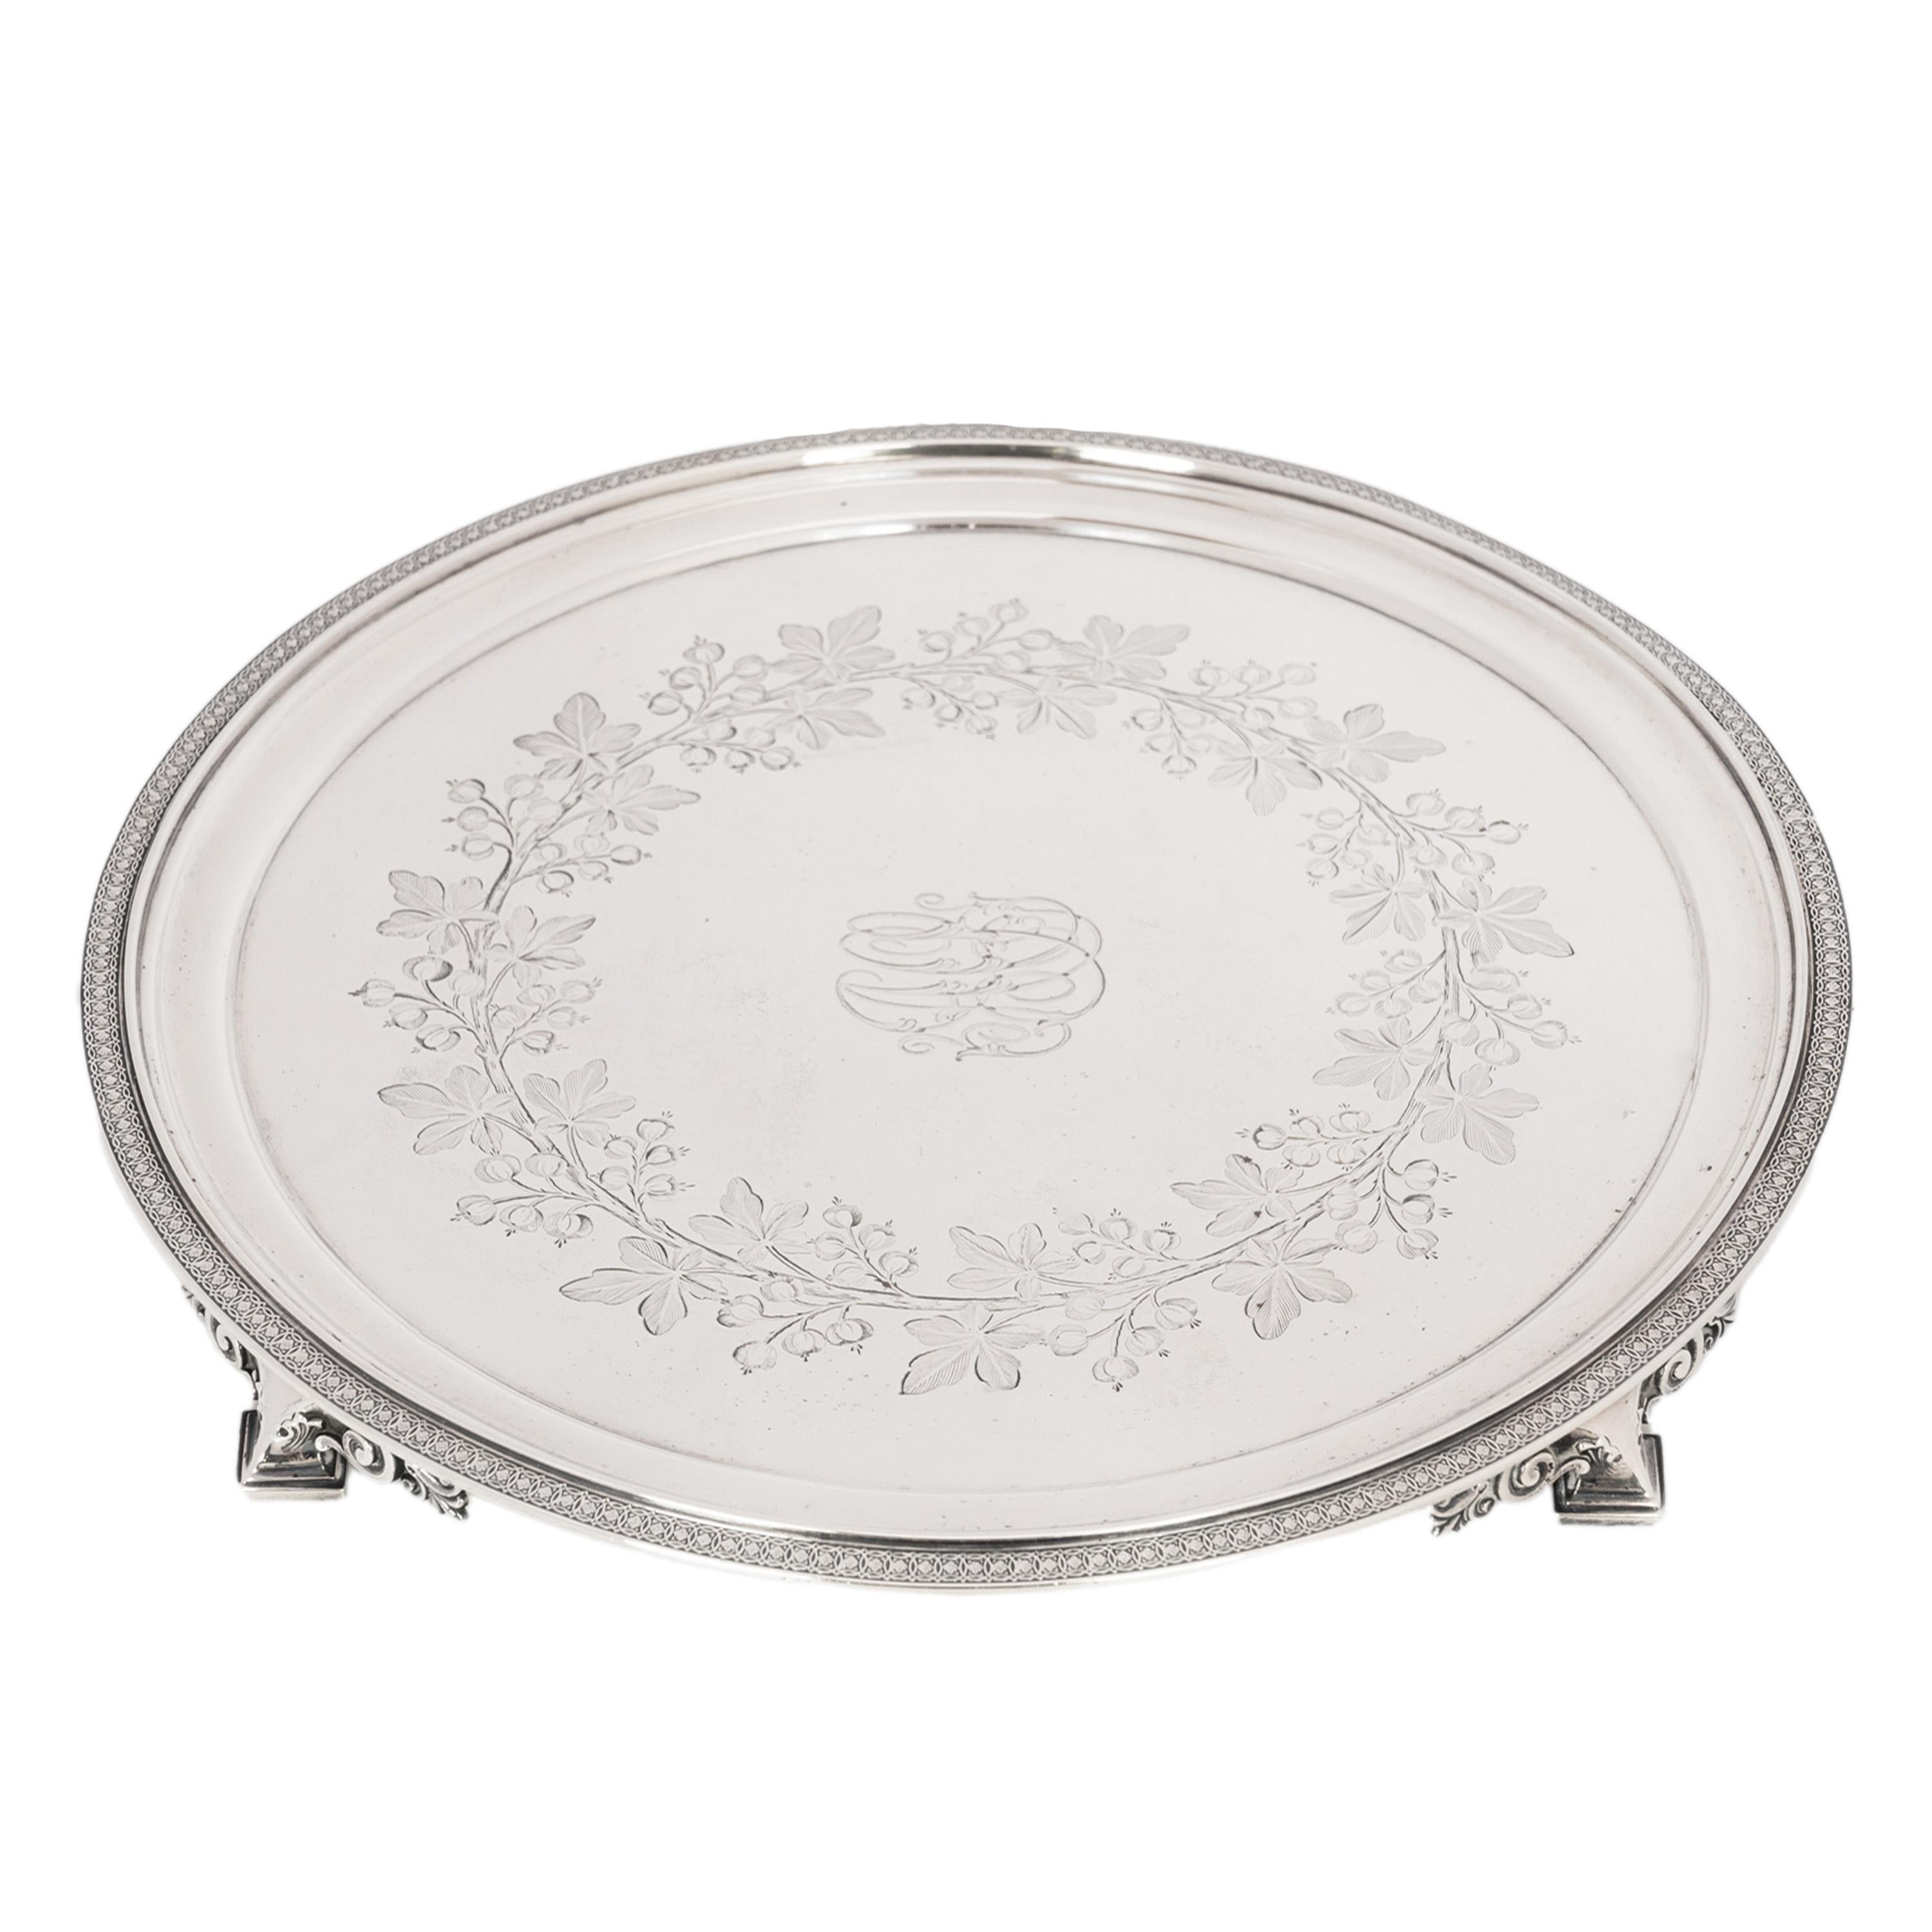 Antique Engraved Sterling Silver Tiffany & Co Footed Salver Tray New York 1870 For Sale 6